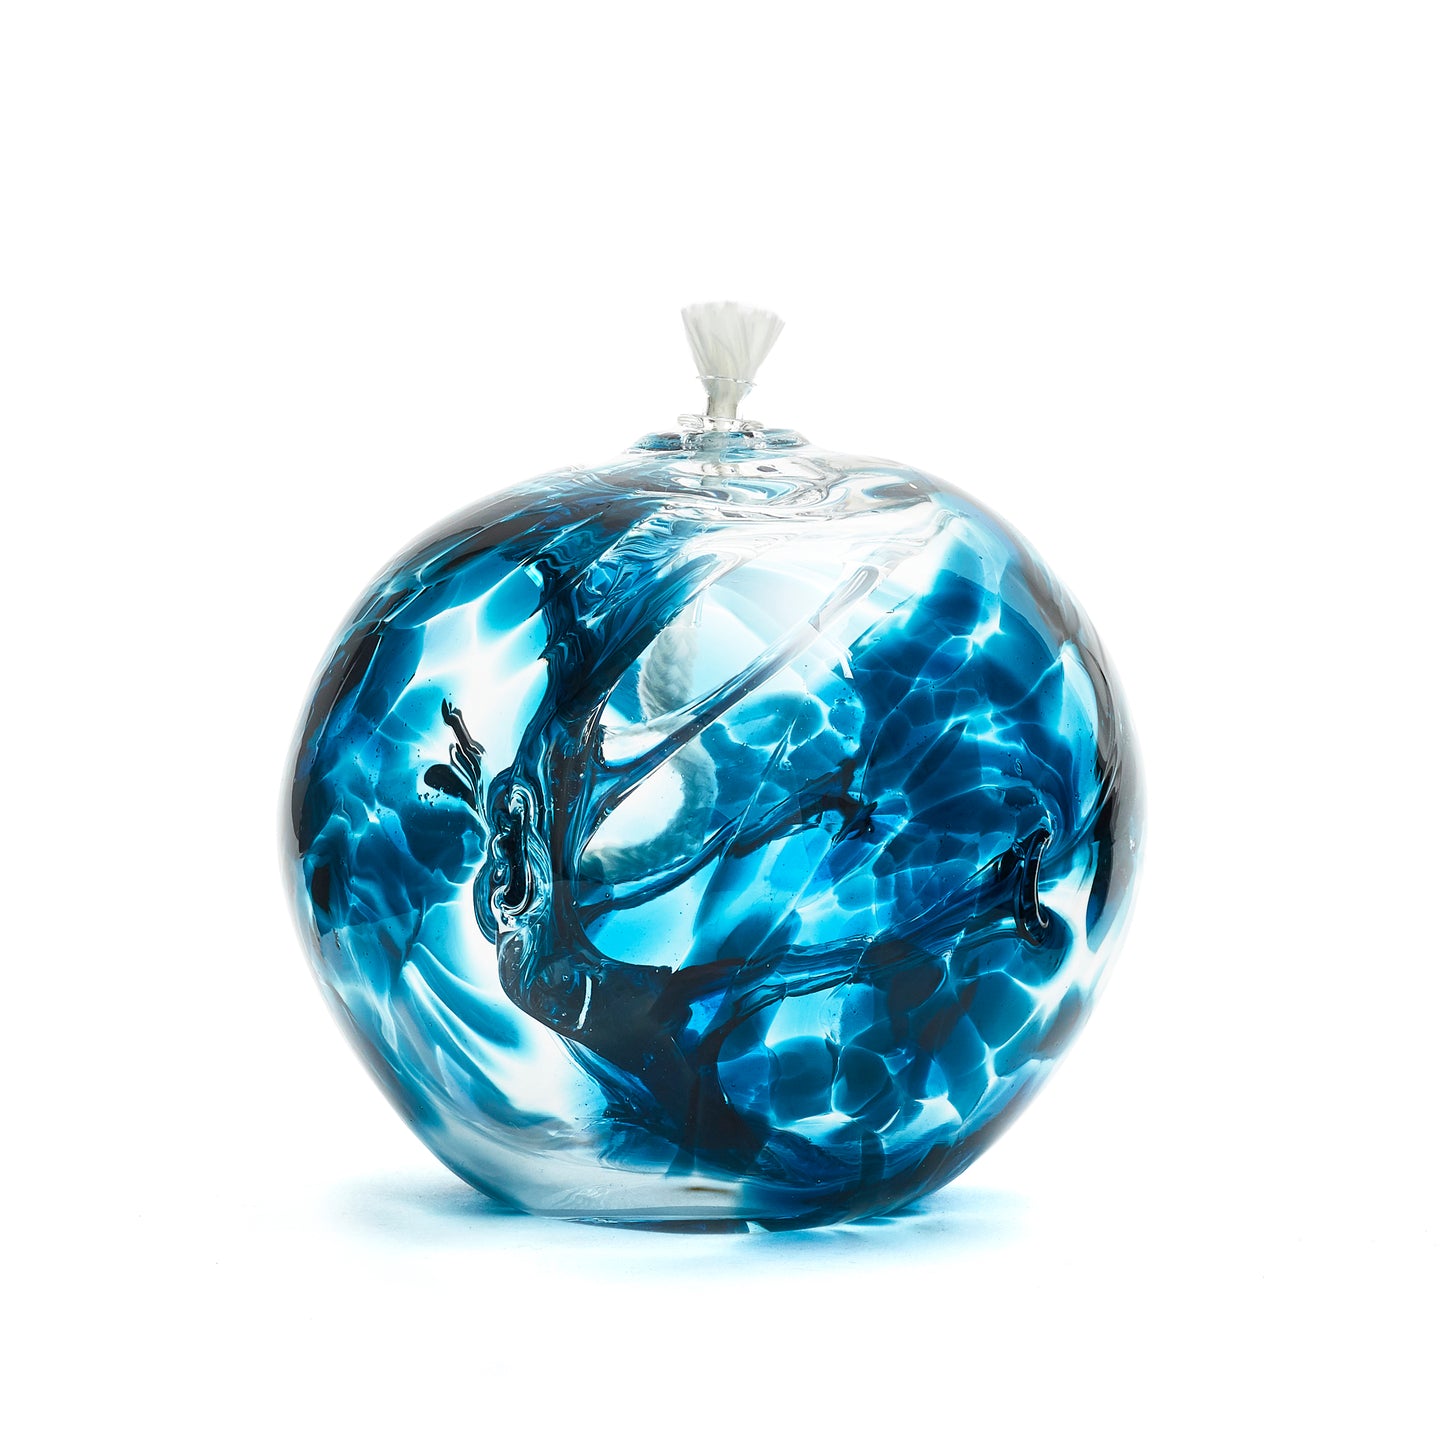 Load image into Gallery viewer, Handmade round ocean wave teal glass oil lamp. Made in Ontario Canada by Gray Art Glass.
